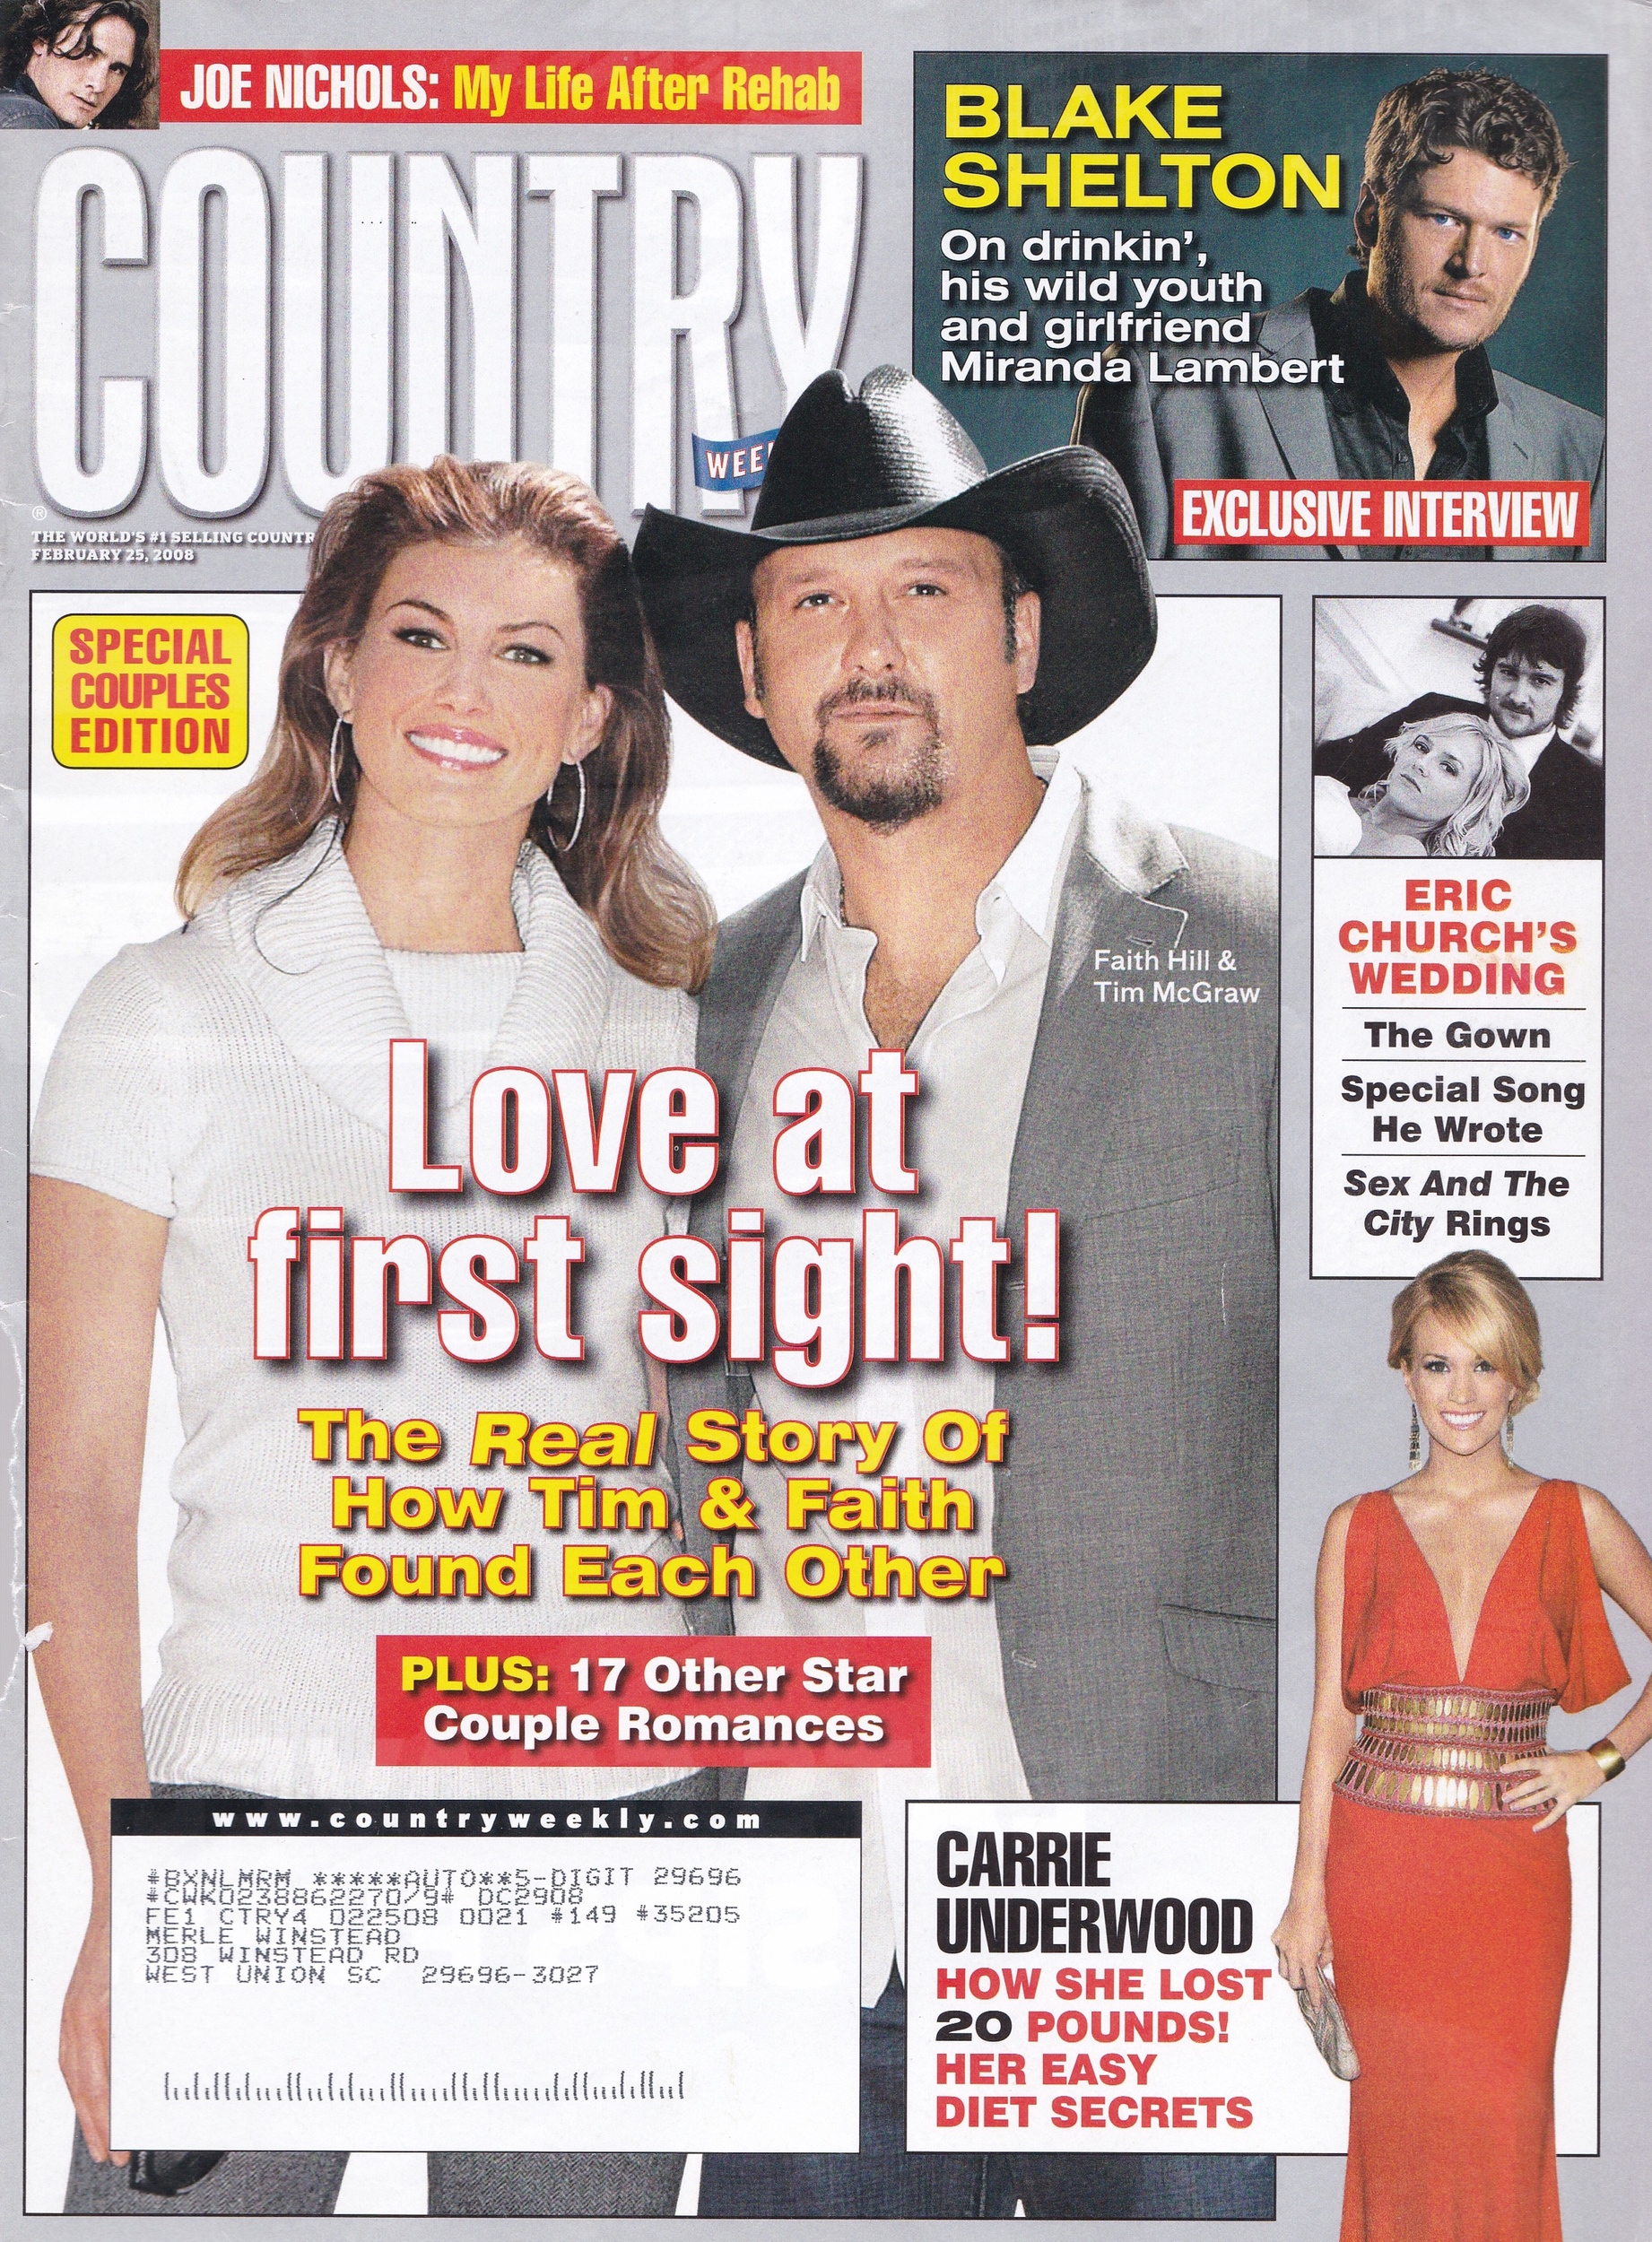 Country Weekly - Feb. 25th 2008